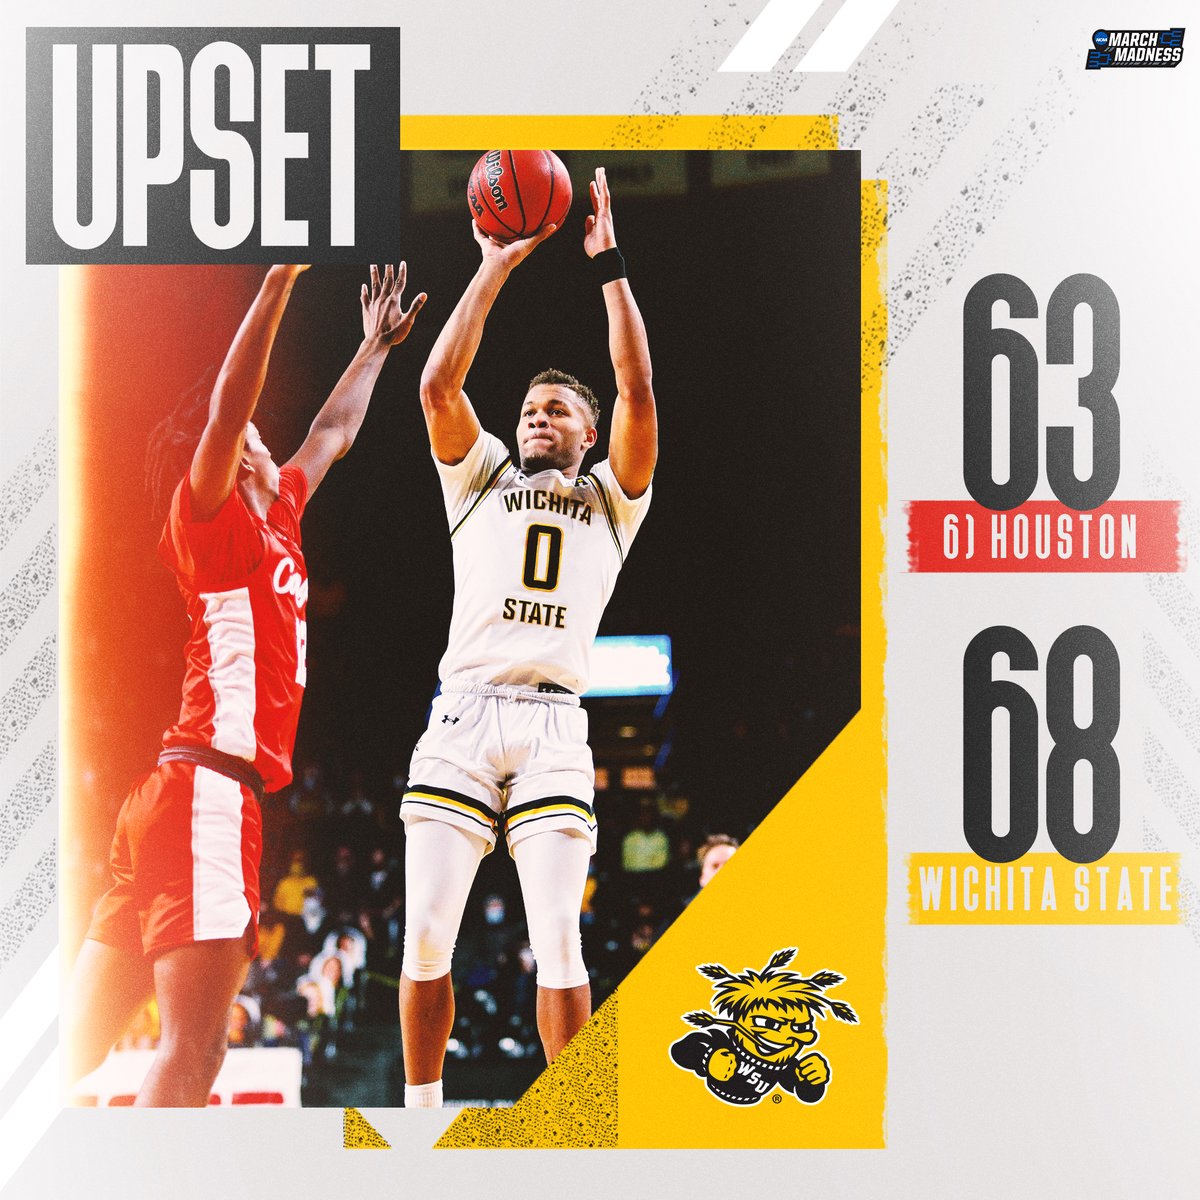 WHAT A SHOCKER! ⚡ Wichita State STUNS No. 6 Houston to secure first place in the American Conference!